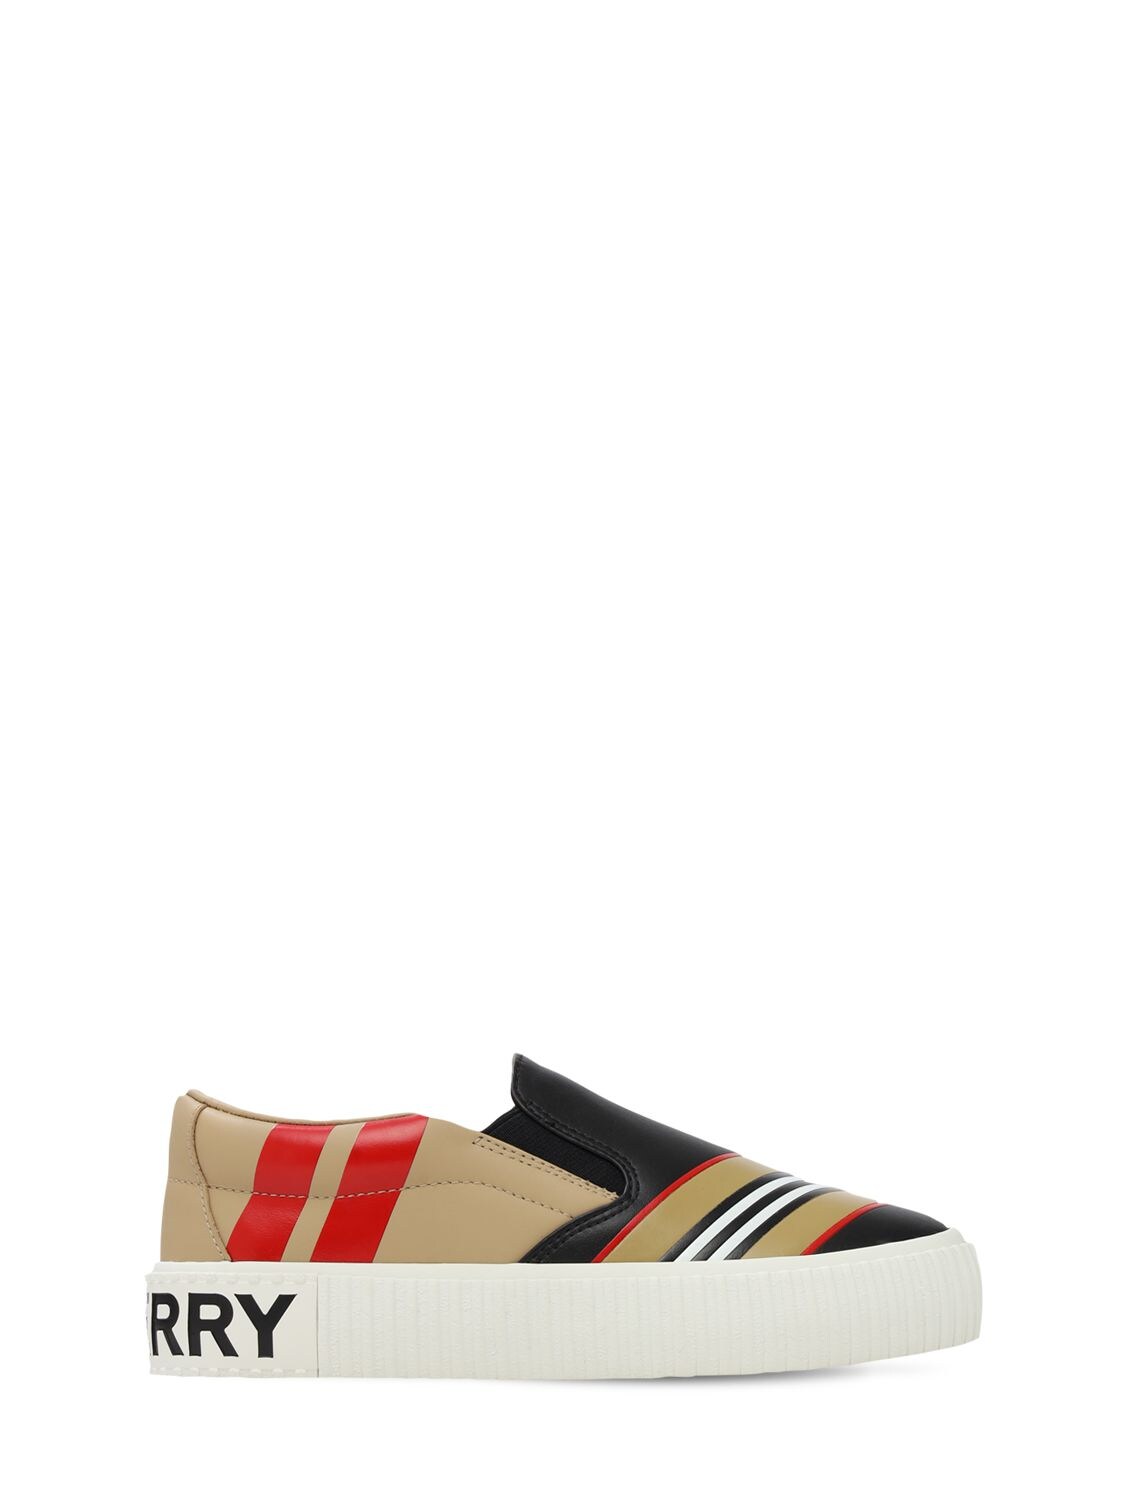 BURBERRY PRINTED LEATHER SLIP-ON trainers,72I1WM002-QTEXODK1